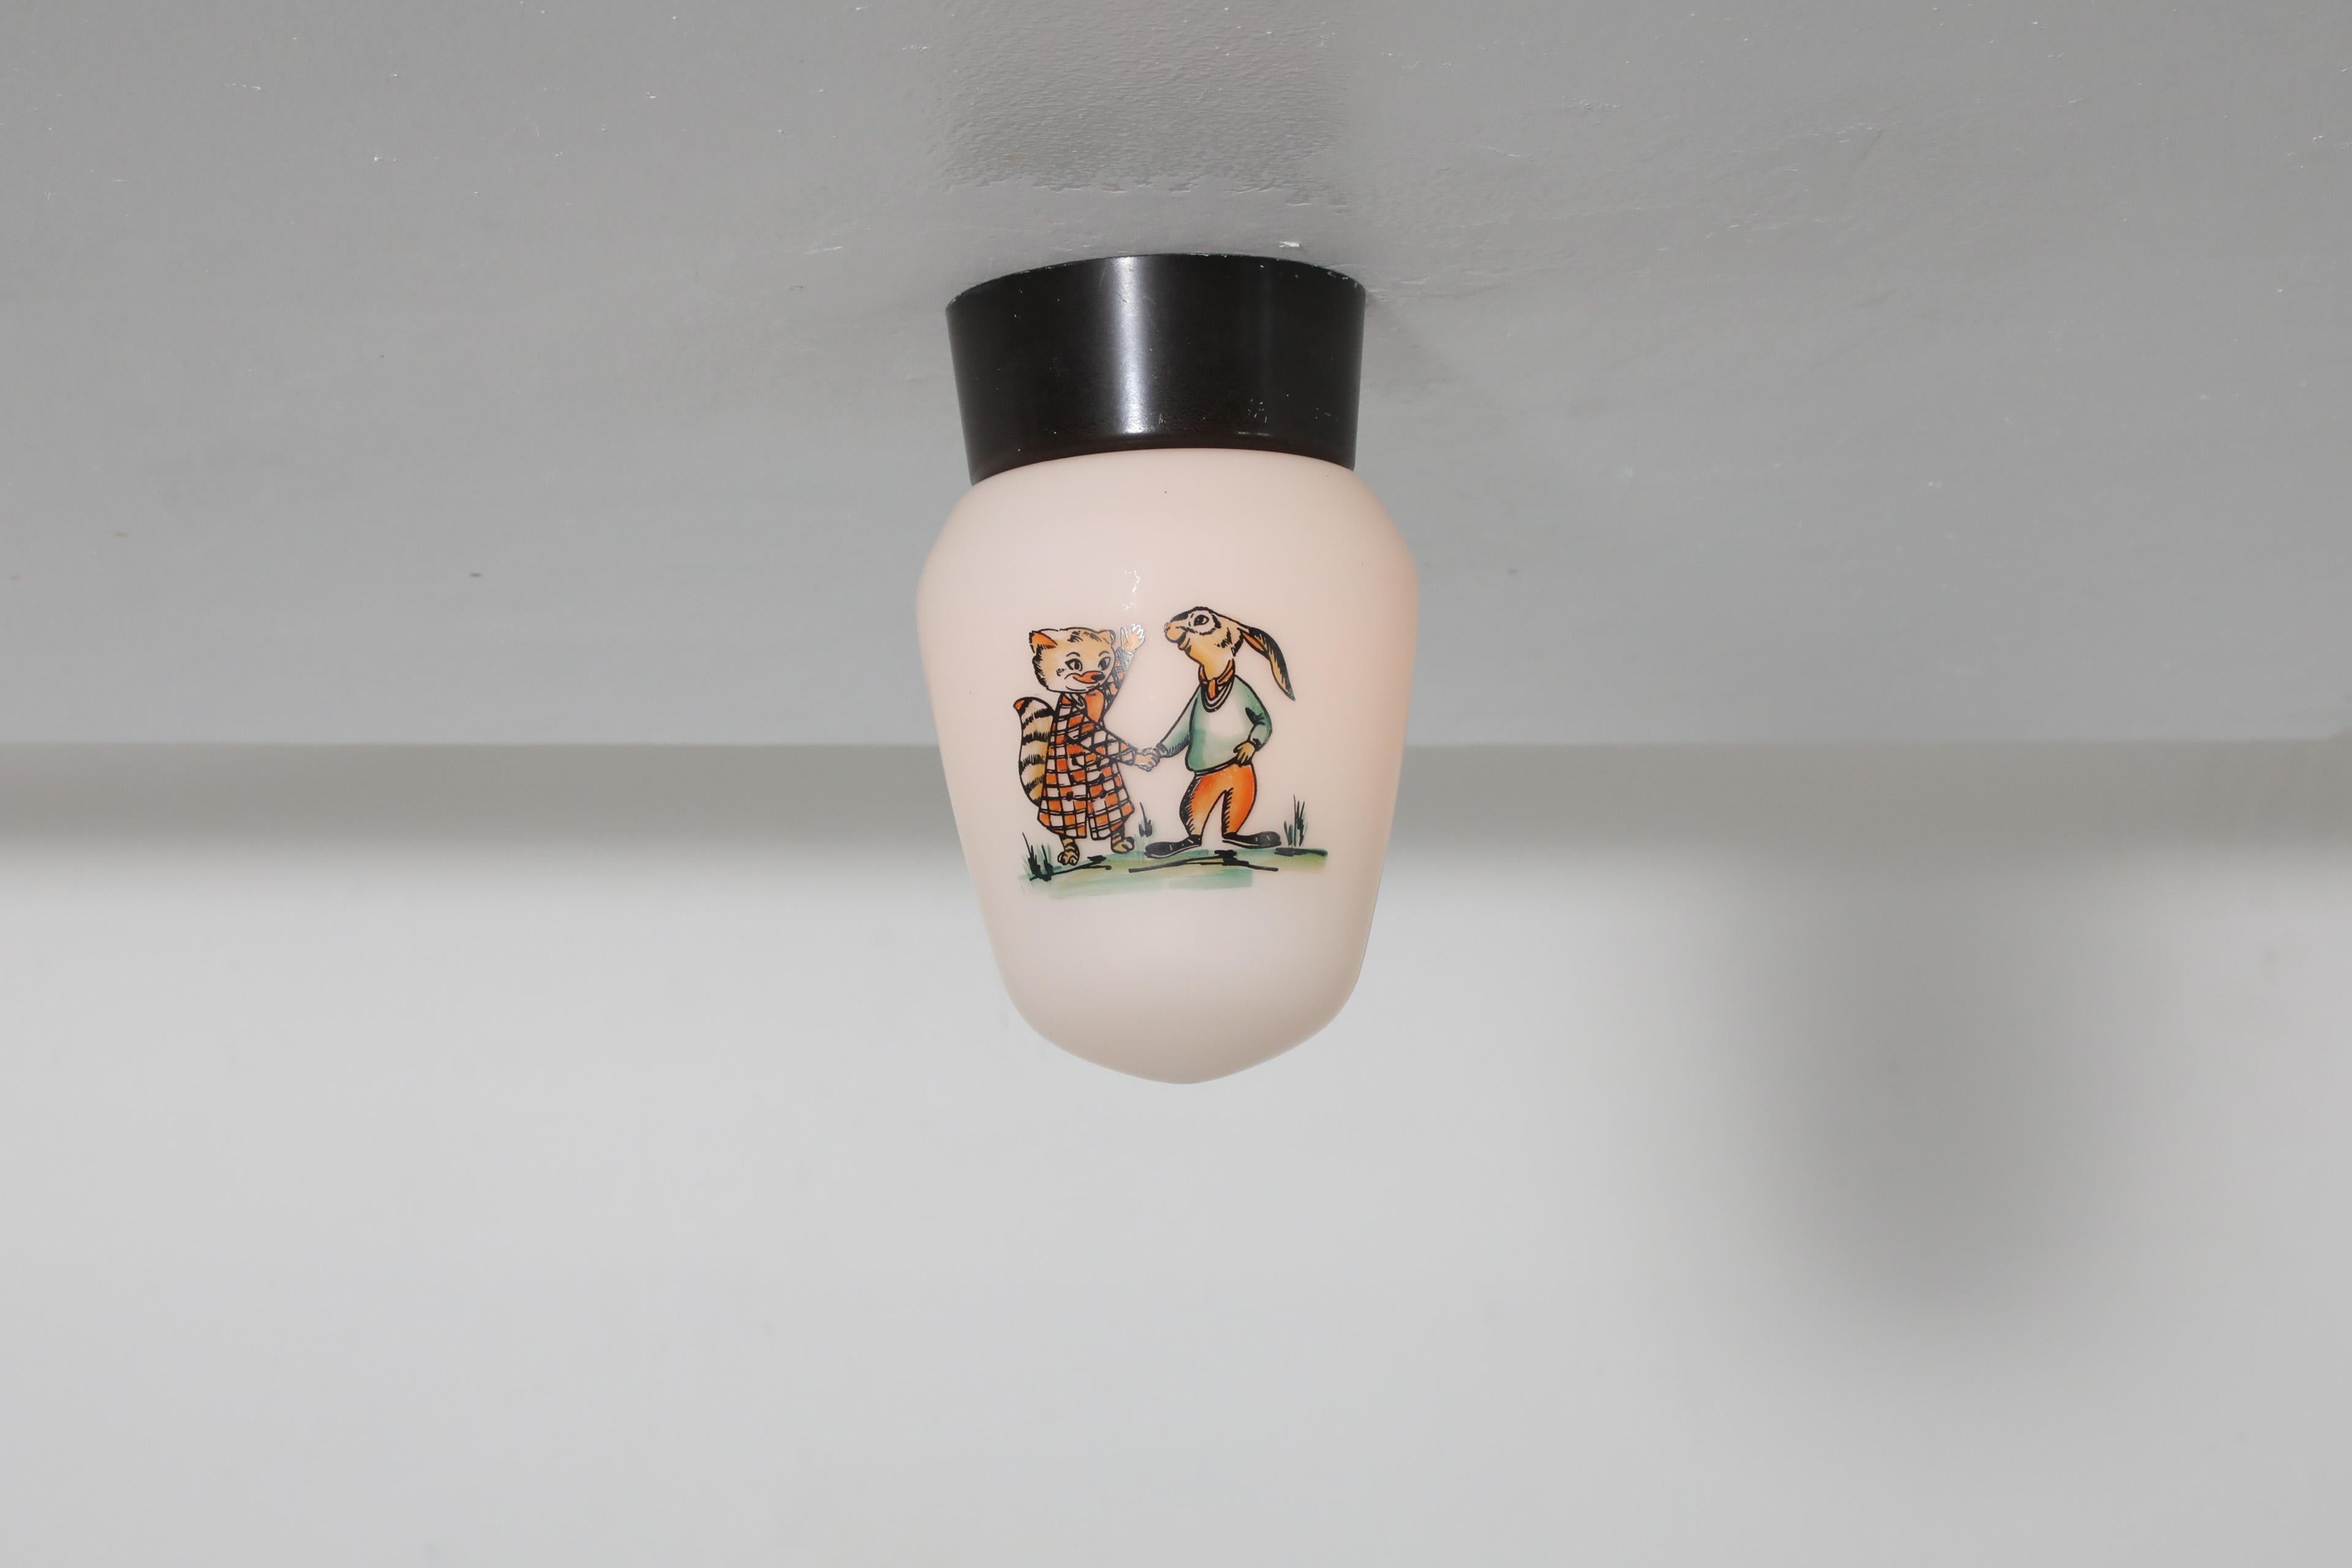 Belgian Mid-Century, 1960's Bo-Niko ceiling light with bakelite base and milk glass shade with cartoon print. A beautiful 1960's ceiling light for a closet, child room or fun entryway. In original condition with wear consistent with age and use. 